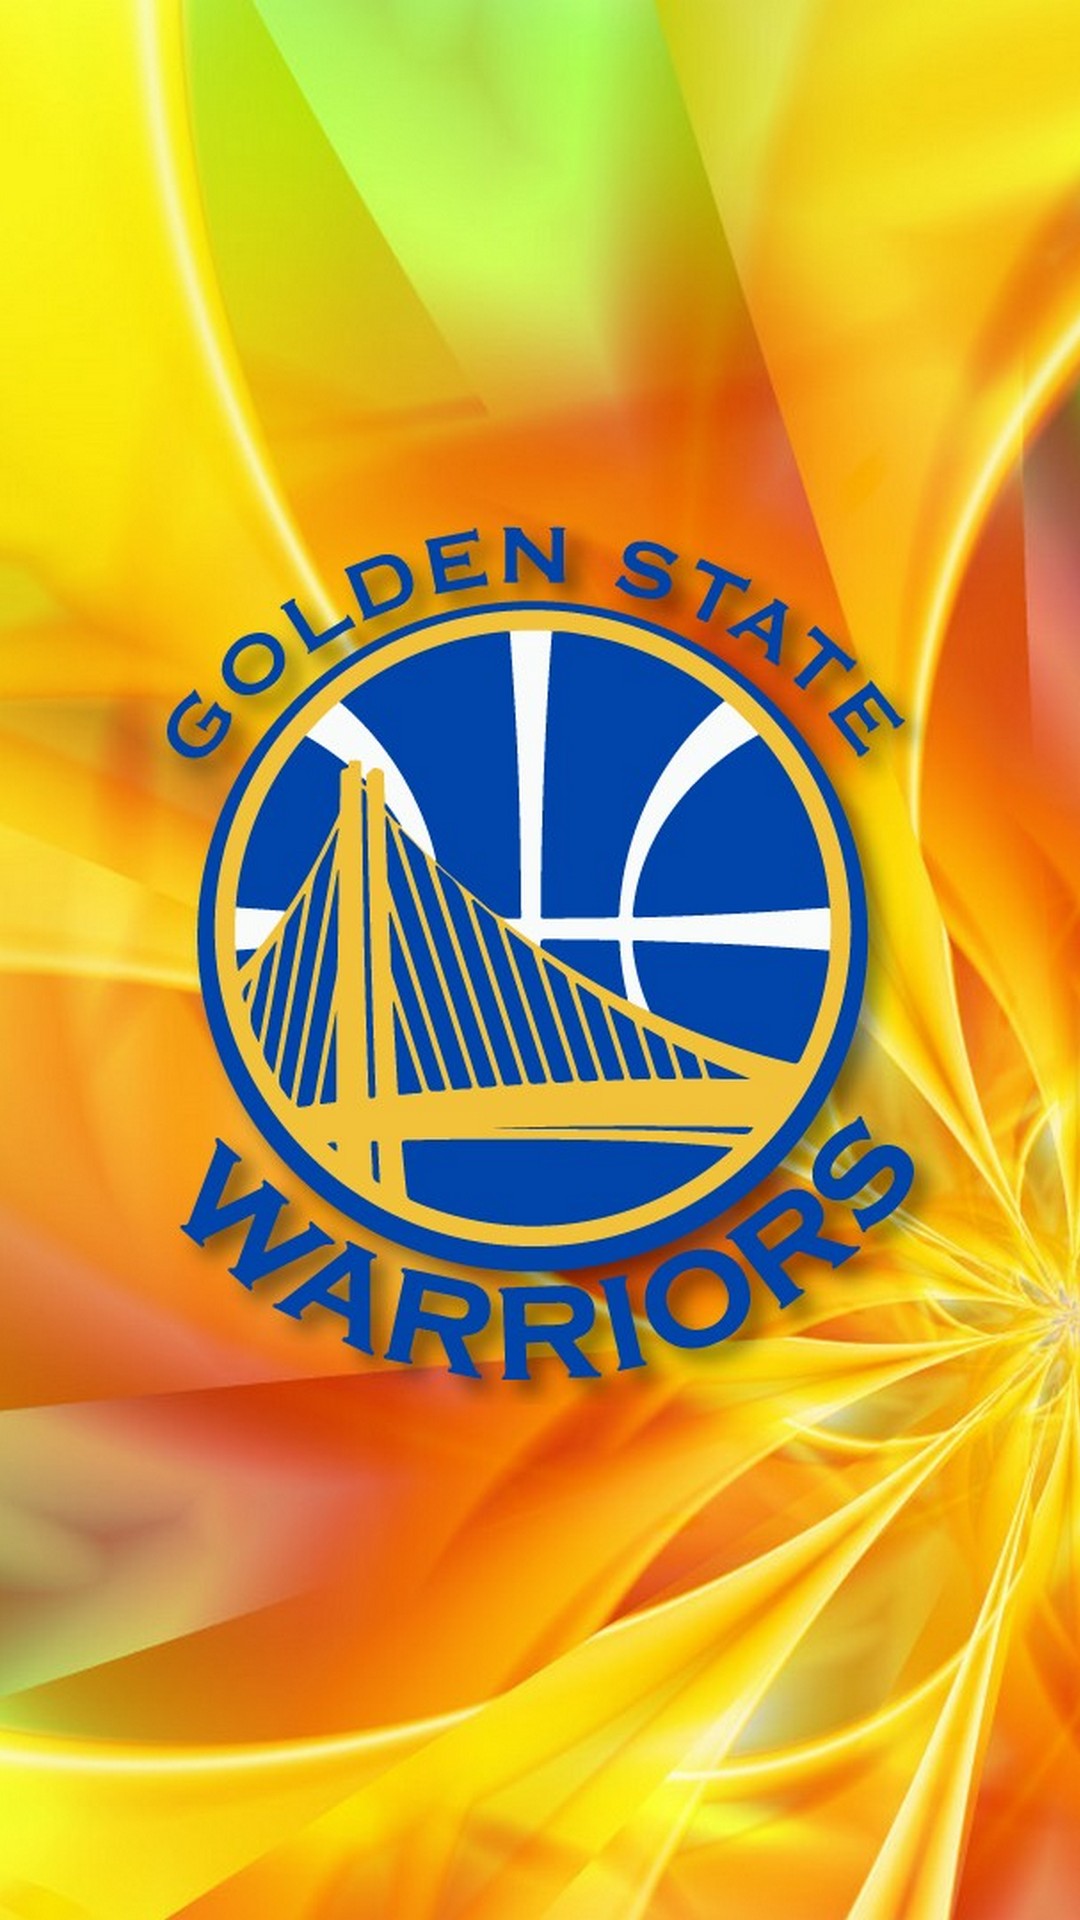 Golden State Warriors Backgrounds For Android with image resolution 1080x1920 pixel. You can make this wallpaper for your Android backgrounds, Tablet, Smartphones Screensavers and Mobile Phone Lock Screen